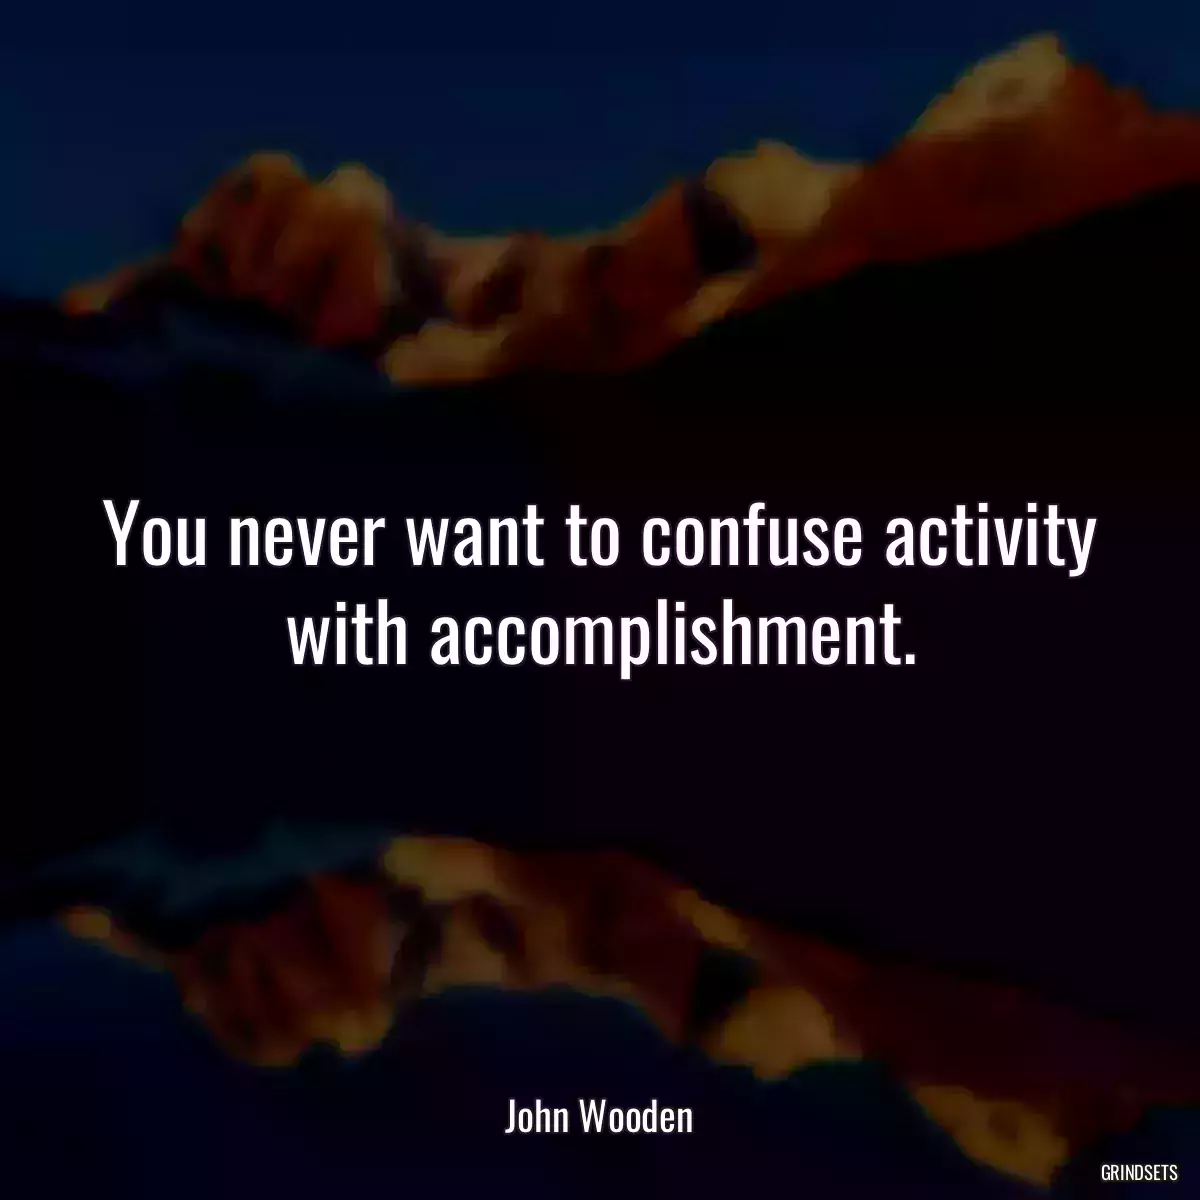 You never want to confuse activity with accomplishment.